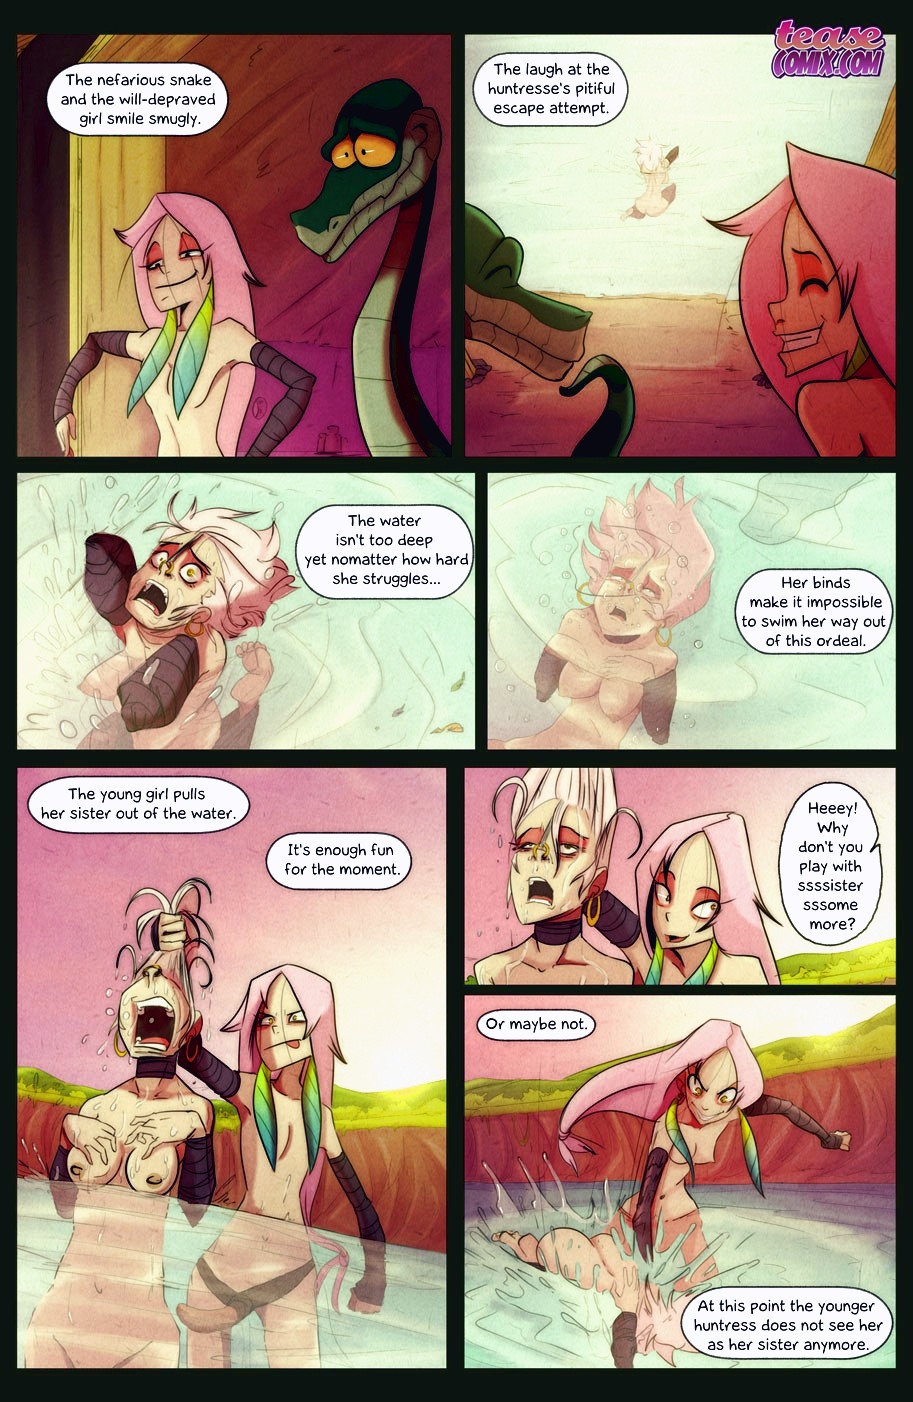 The Snake and The Girl 5 page 03